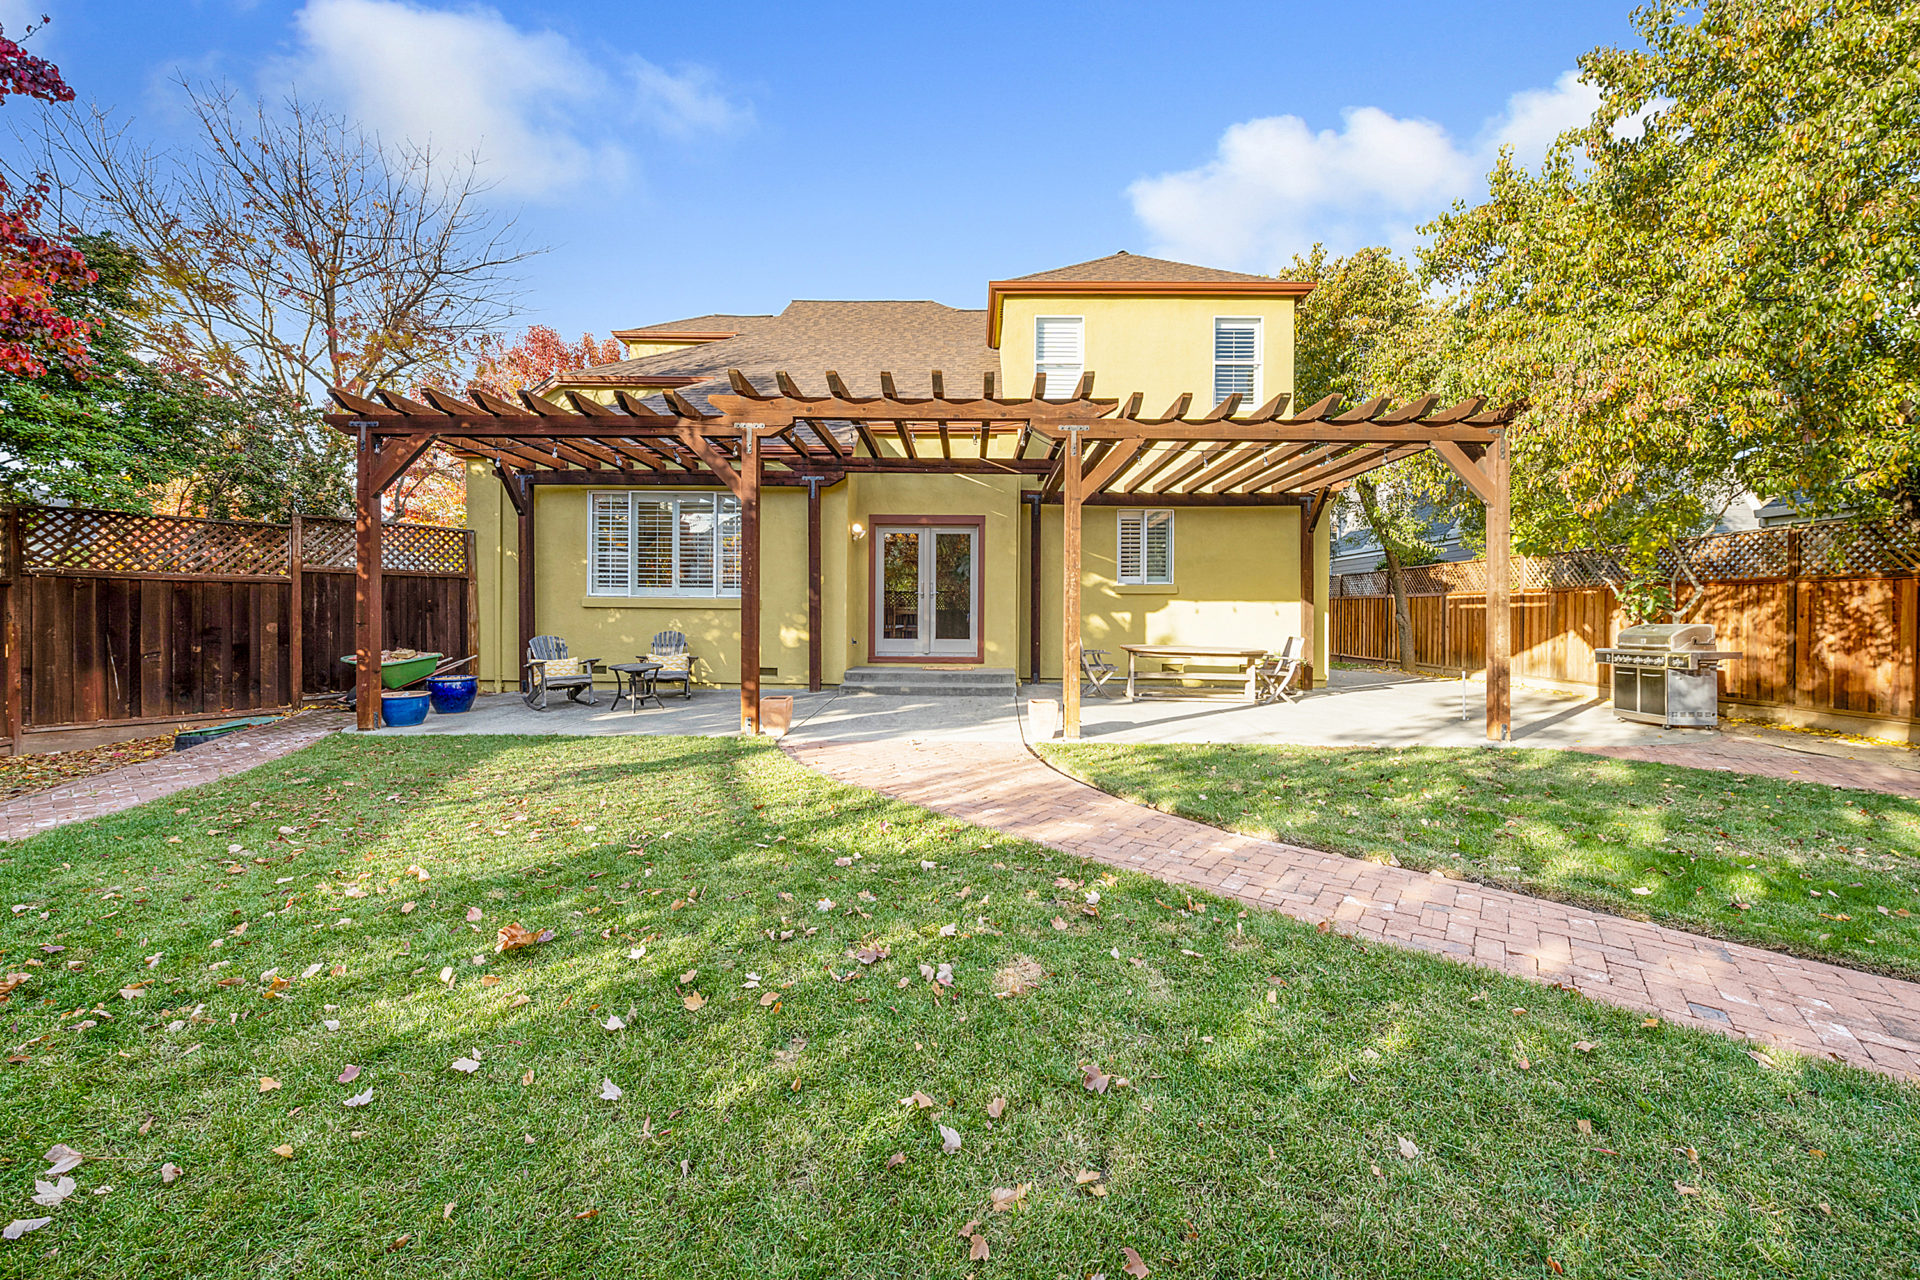 Updated Santa Rosa Home with Amazing Yard